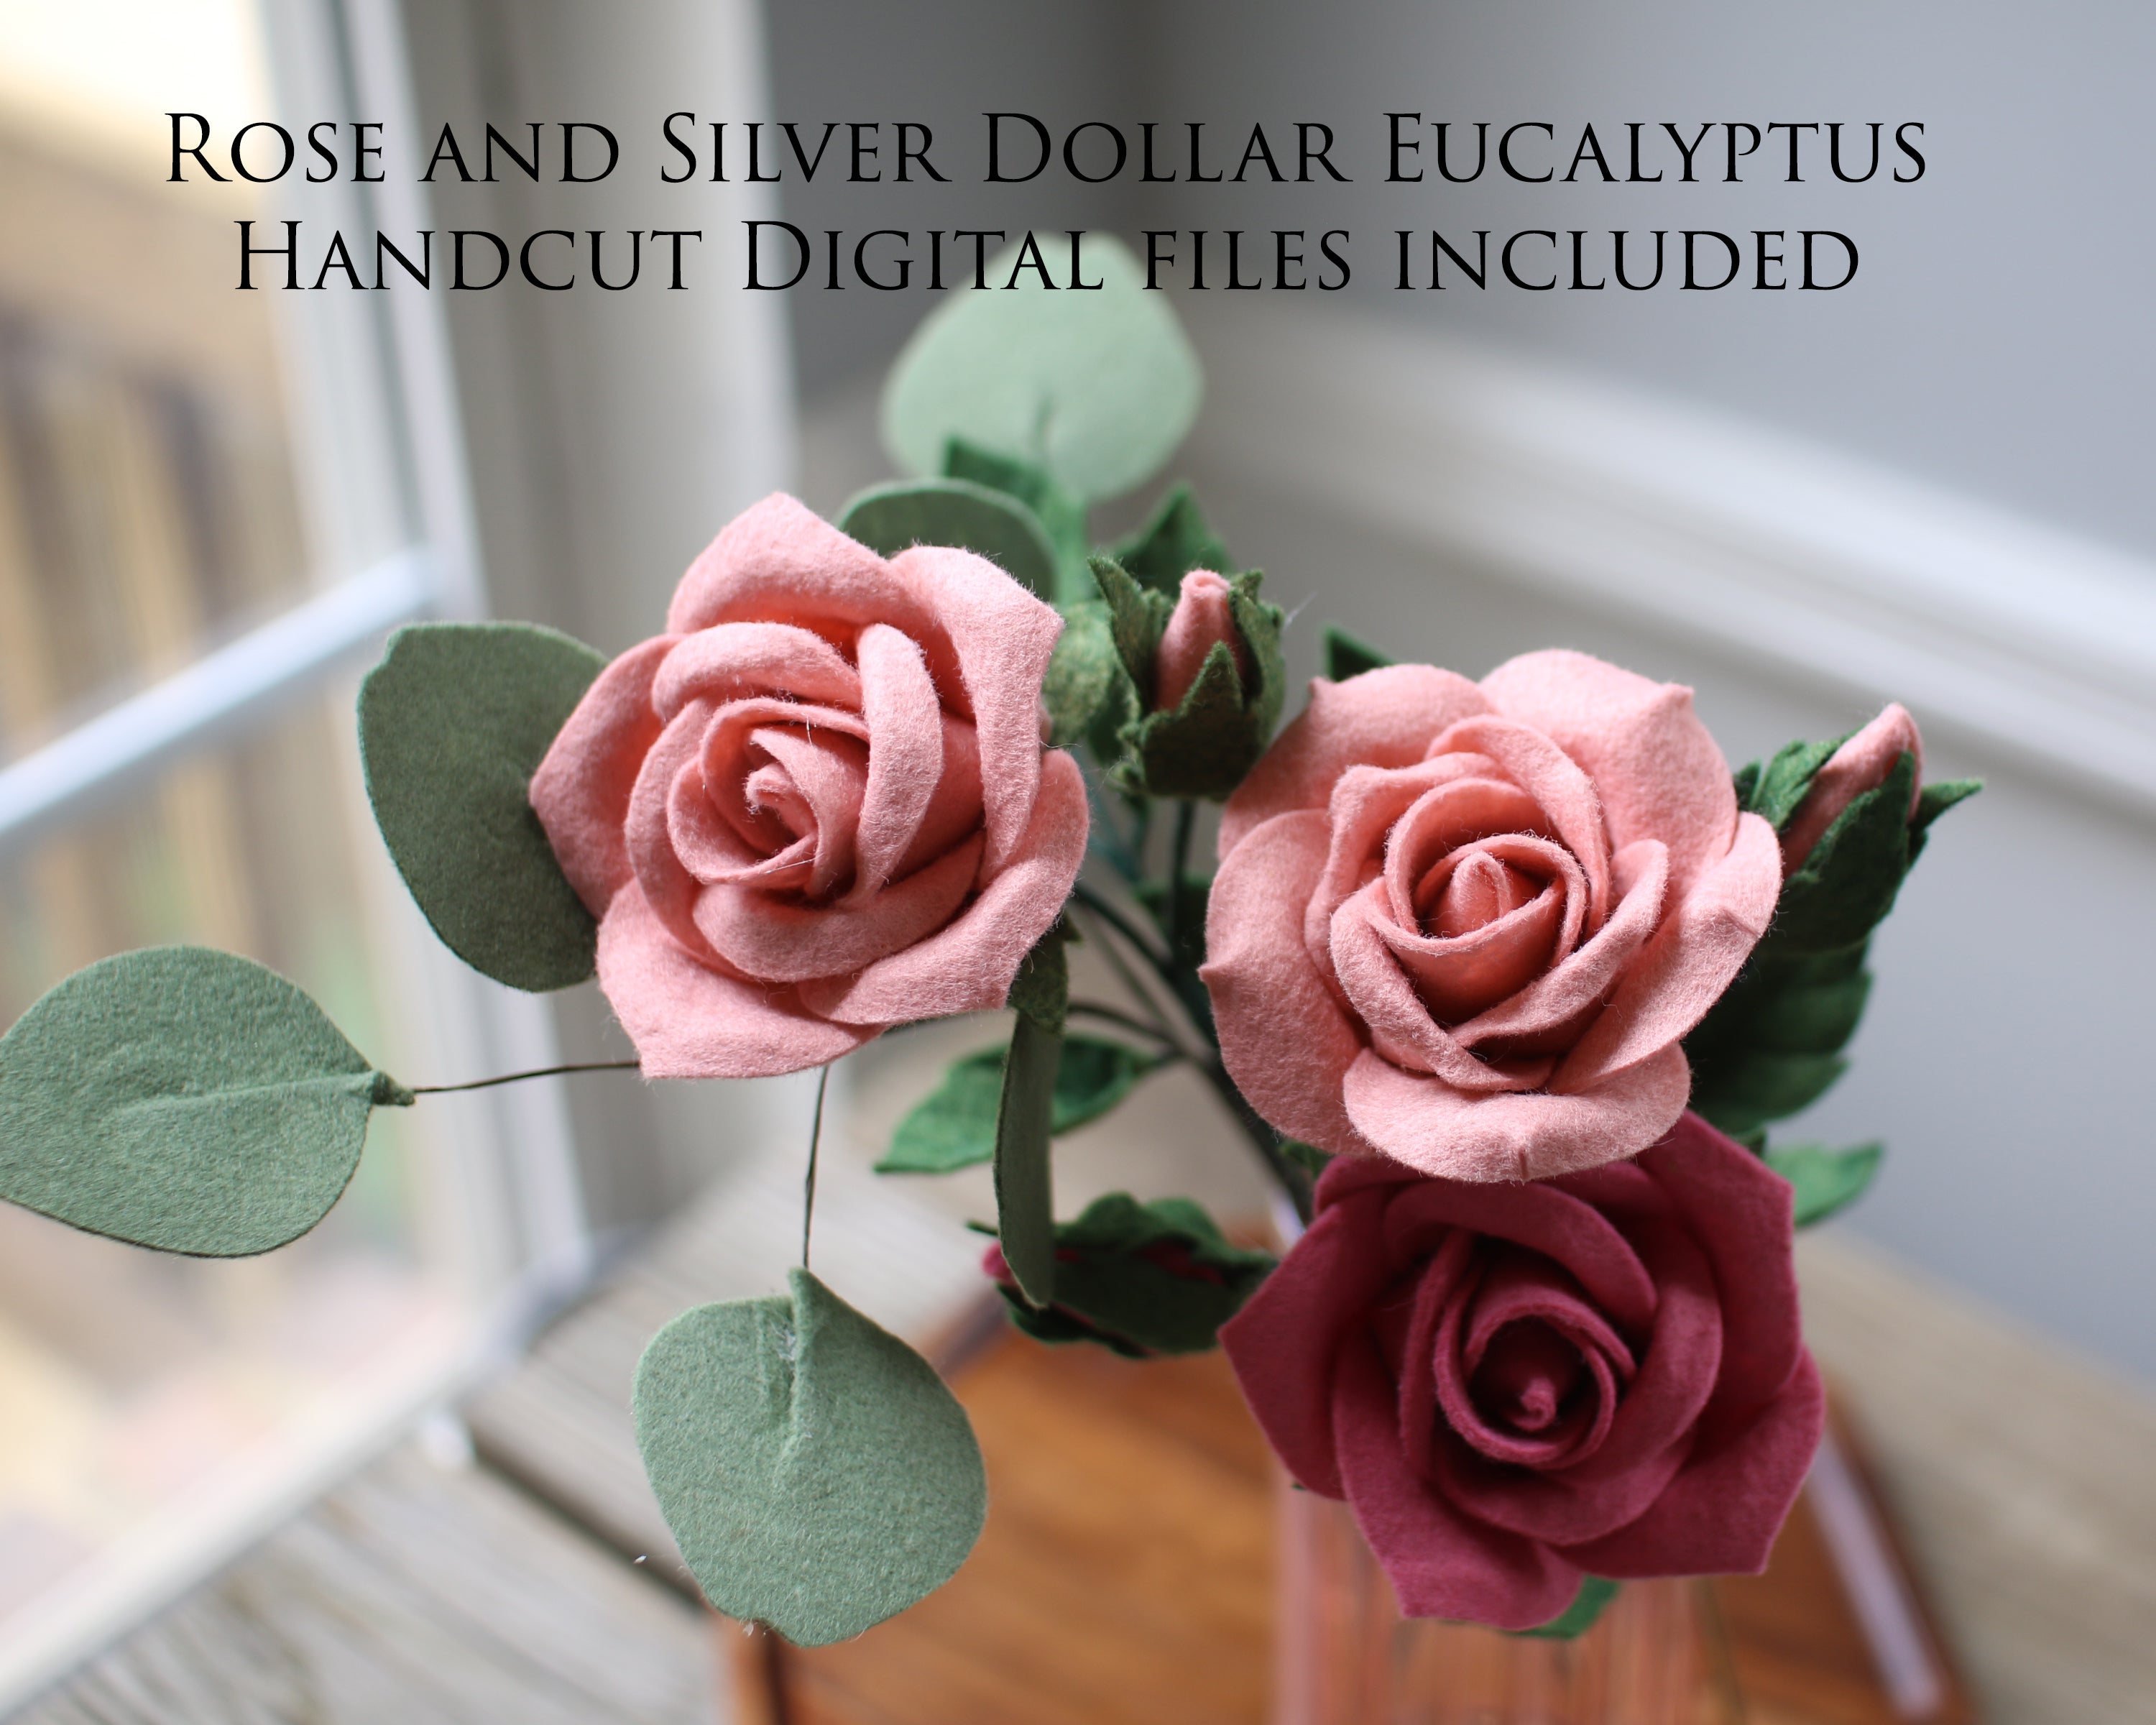 Single Rose Bouquet with Silver Dollar Handcut Digital Only